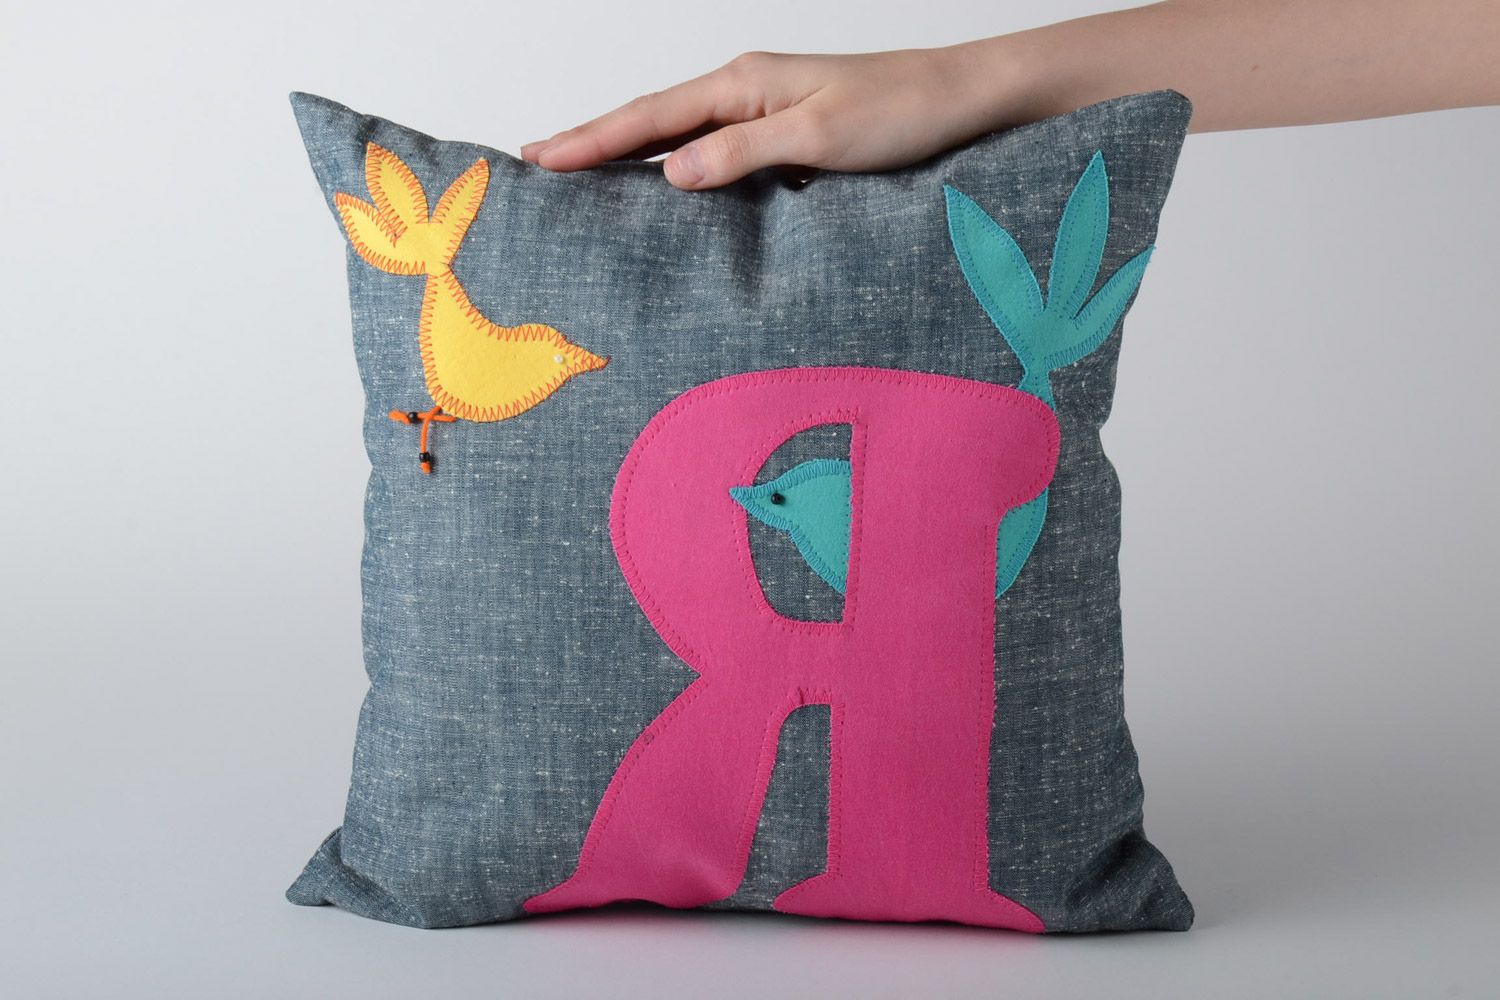 Handmade designer fabric cushion with removable pillowcase decorated with letter applique photo 5